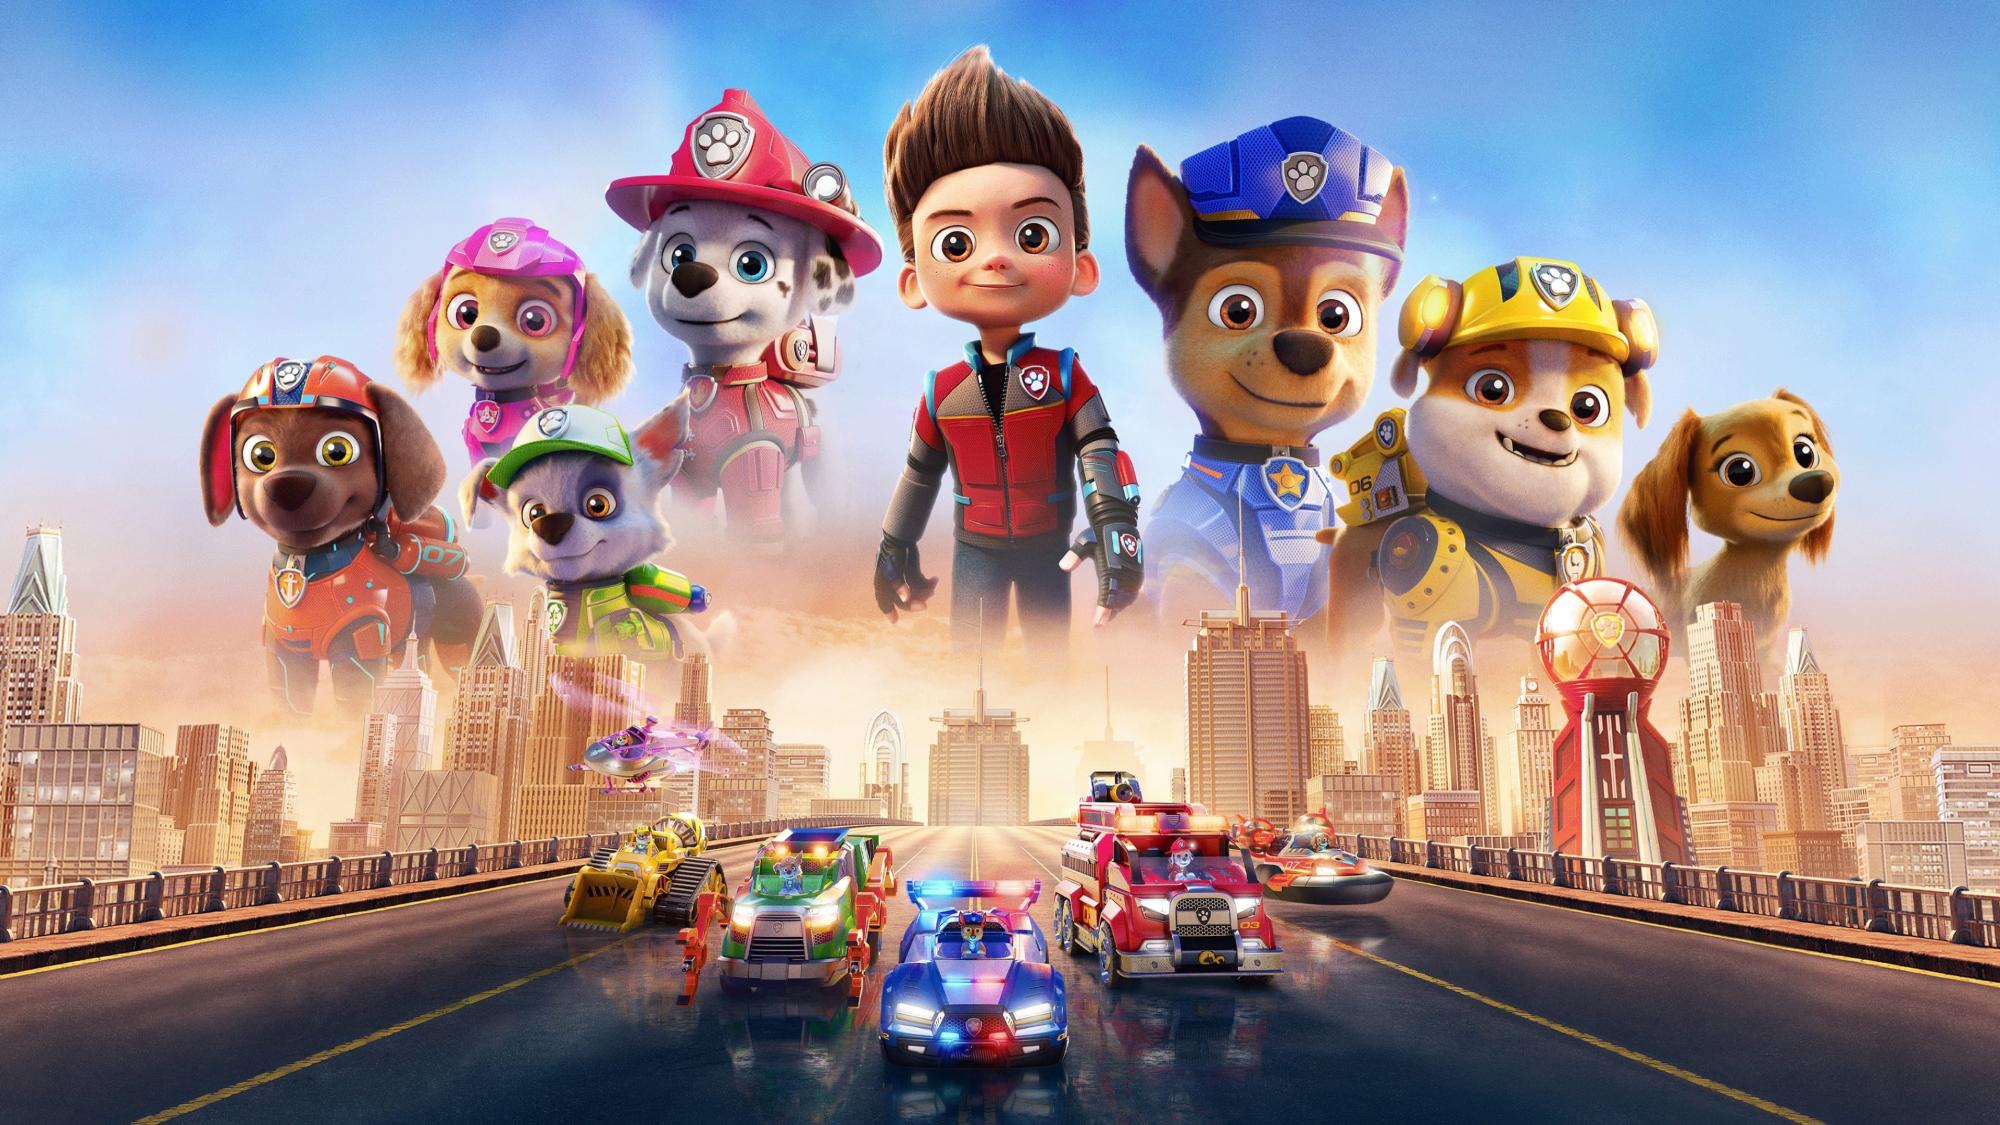 Backdrop Image for PAW Patrol: The Movie